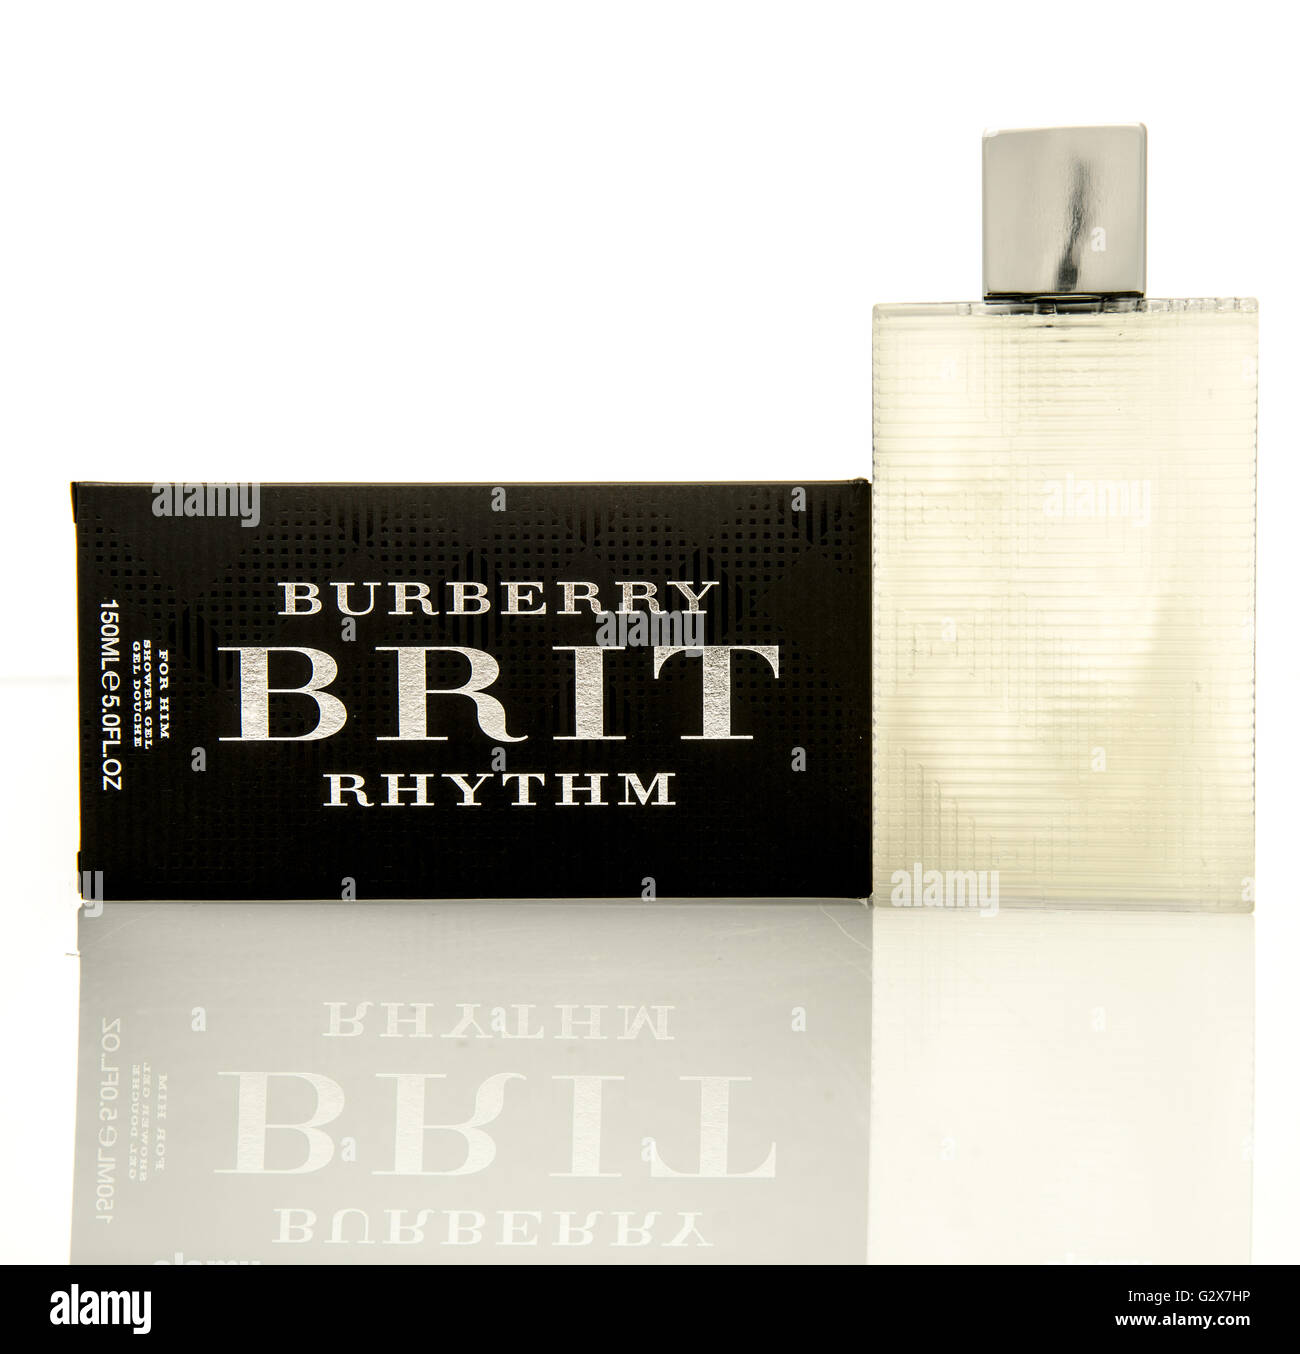 Winneconne, WI - 2 June 2016:  Burberry Brit rhythm shower gel on an isolated background Stock Photo